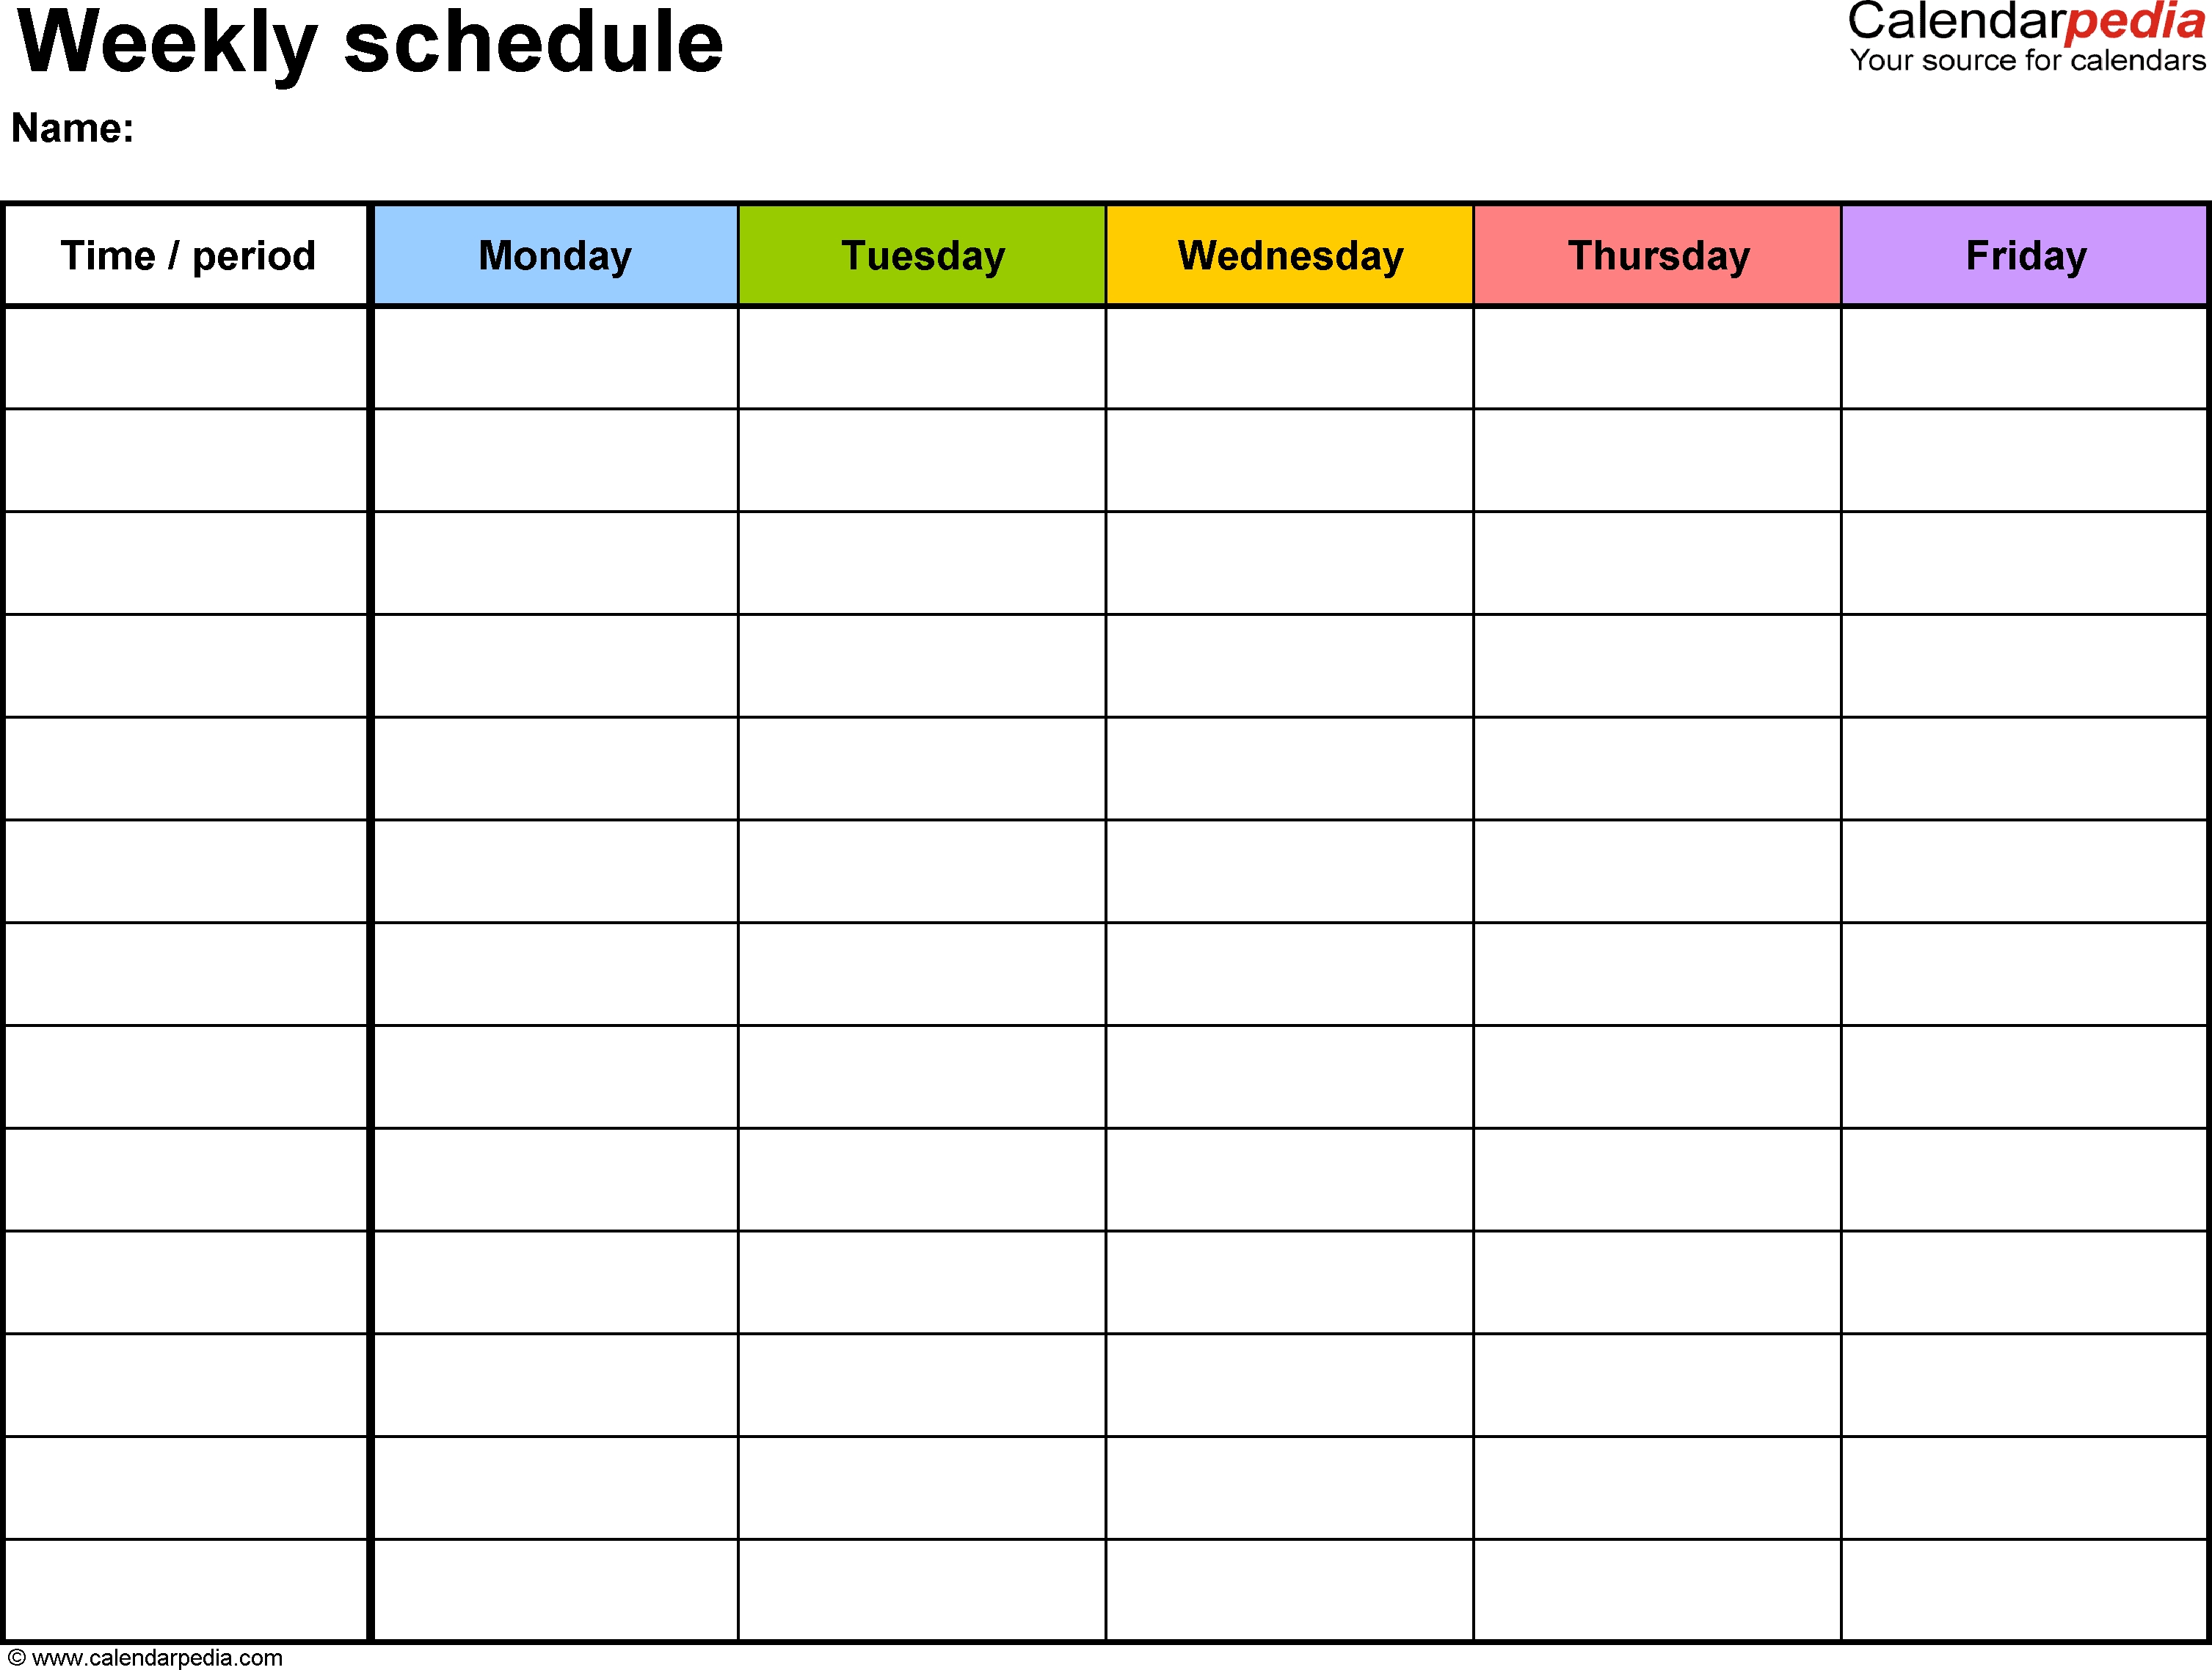 Free Weekly Schedule Templates For Excel - 18 Templates intended for Week Five Date Calendars Templates